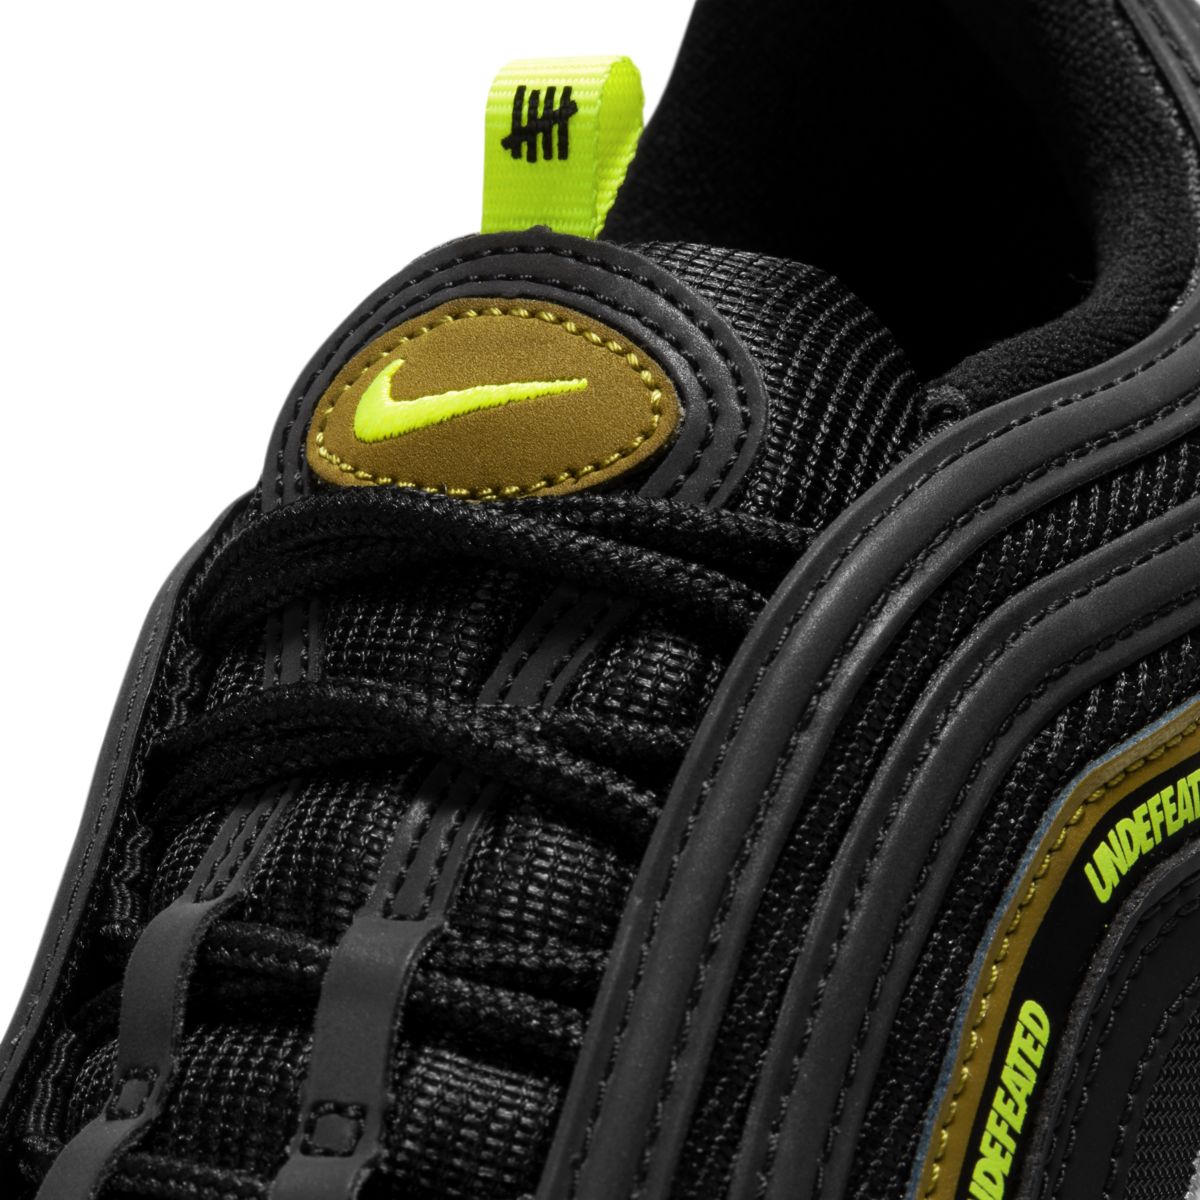 Undefeated x Nike Air Max 97 Black Volt DC4830-001 9